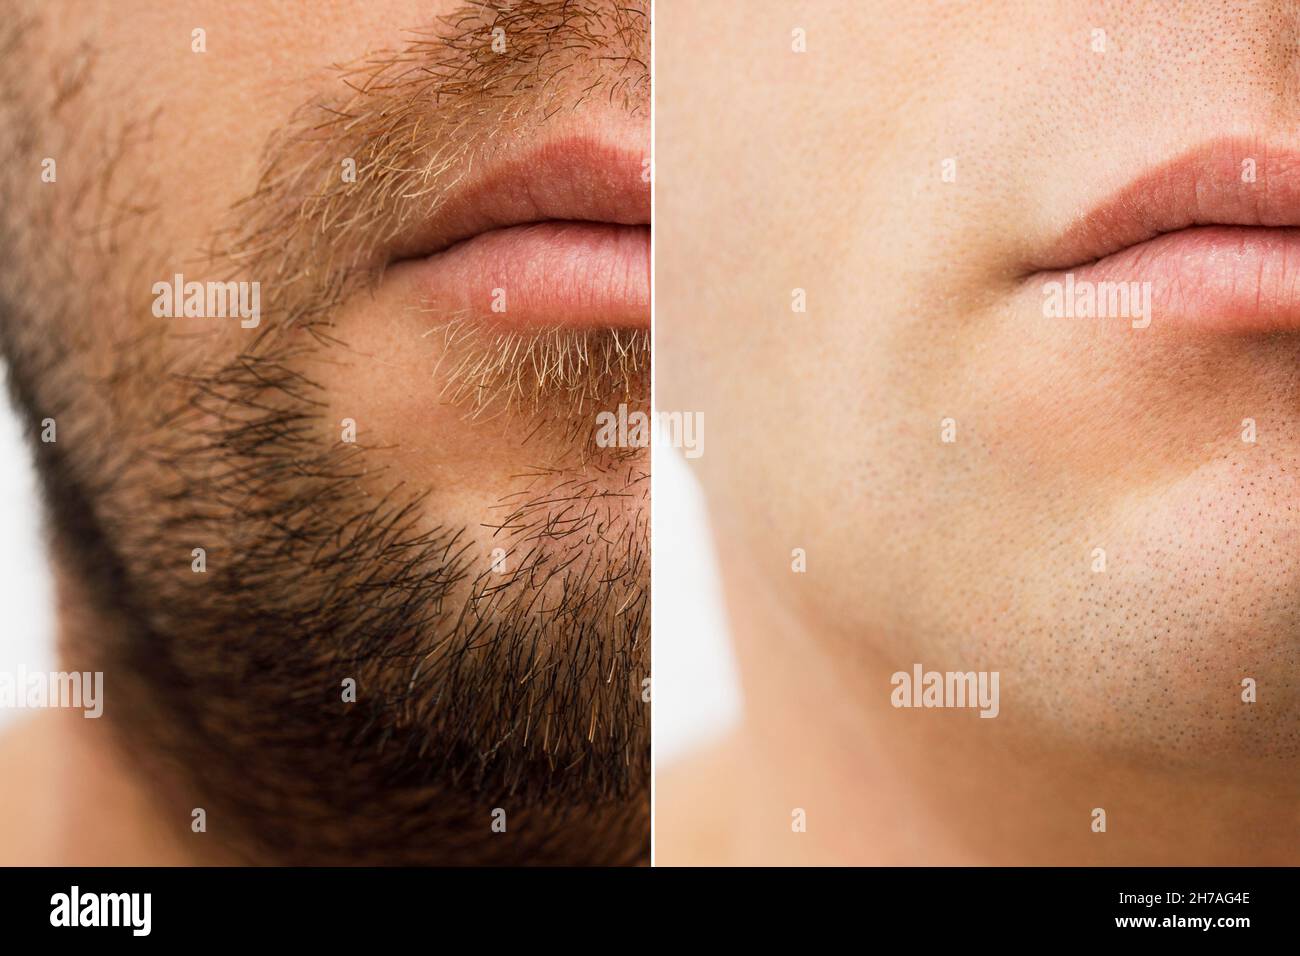 Close up photo of a man's face before and after shaving. a young man with a beard. Comparison of a man's face with a beard and without a beard. use of Stock Photo